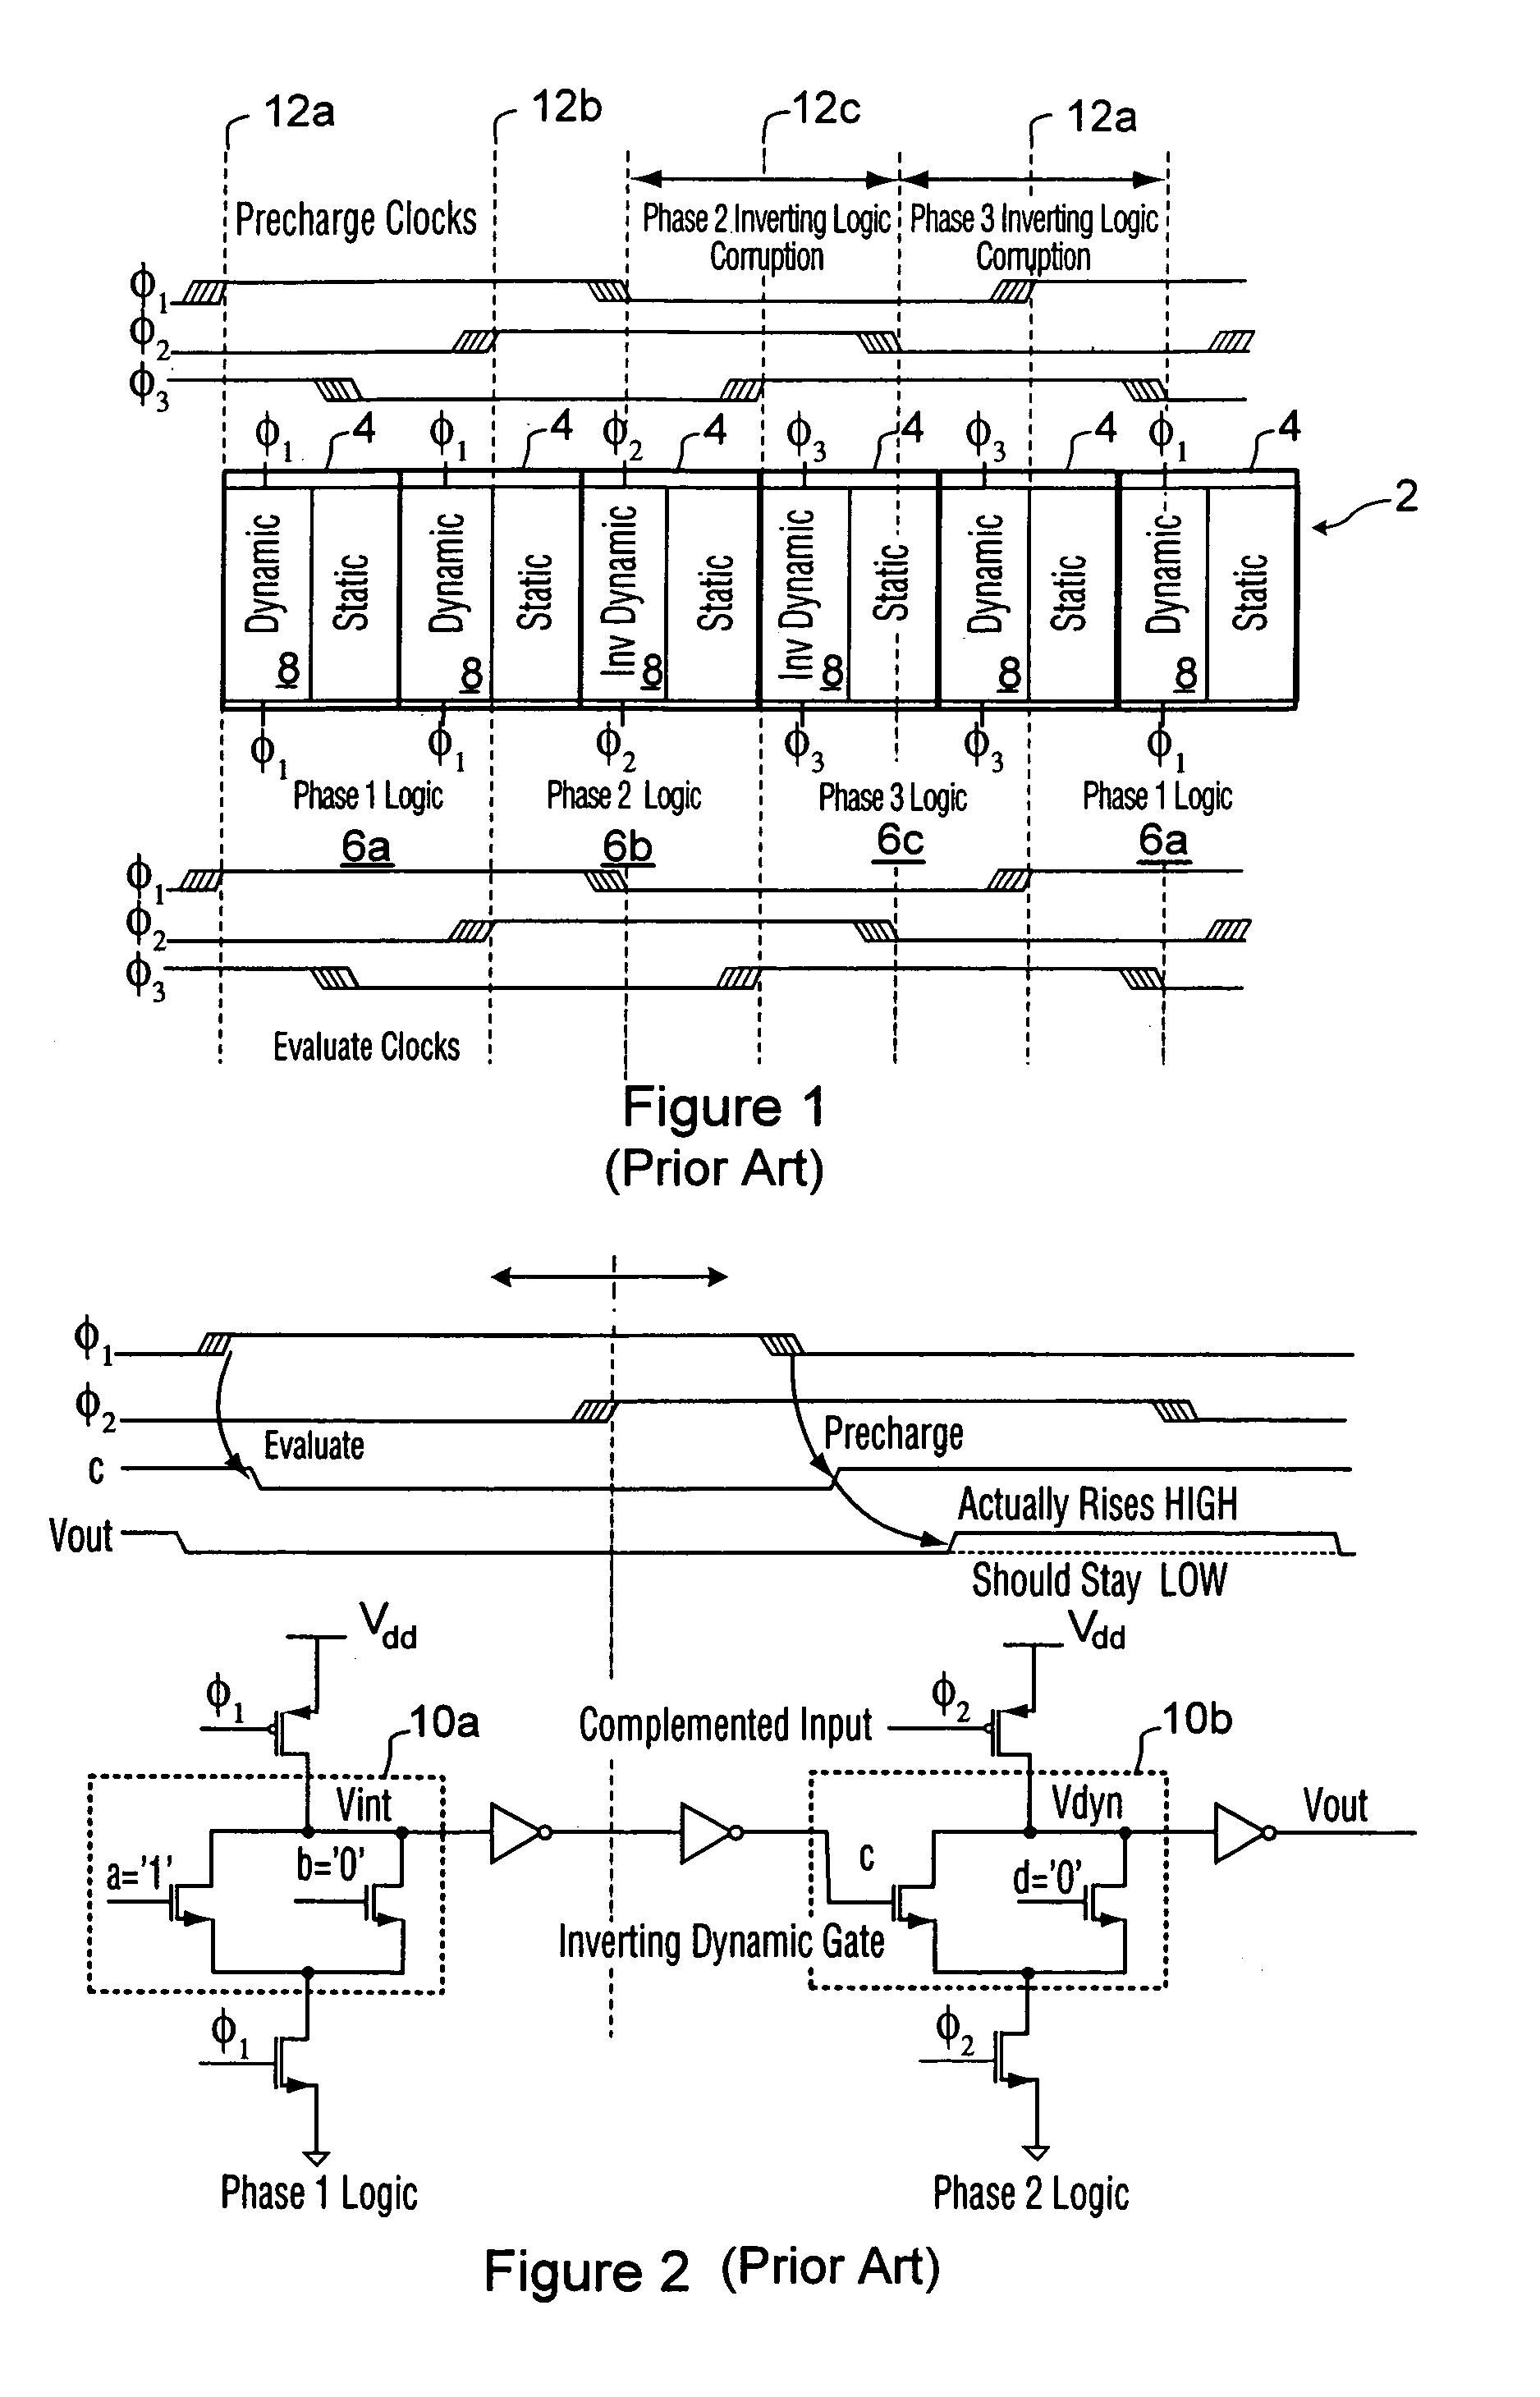 Clock logic domino circuits for high-speed and energy efficient microprocessor pipelines